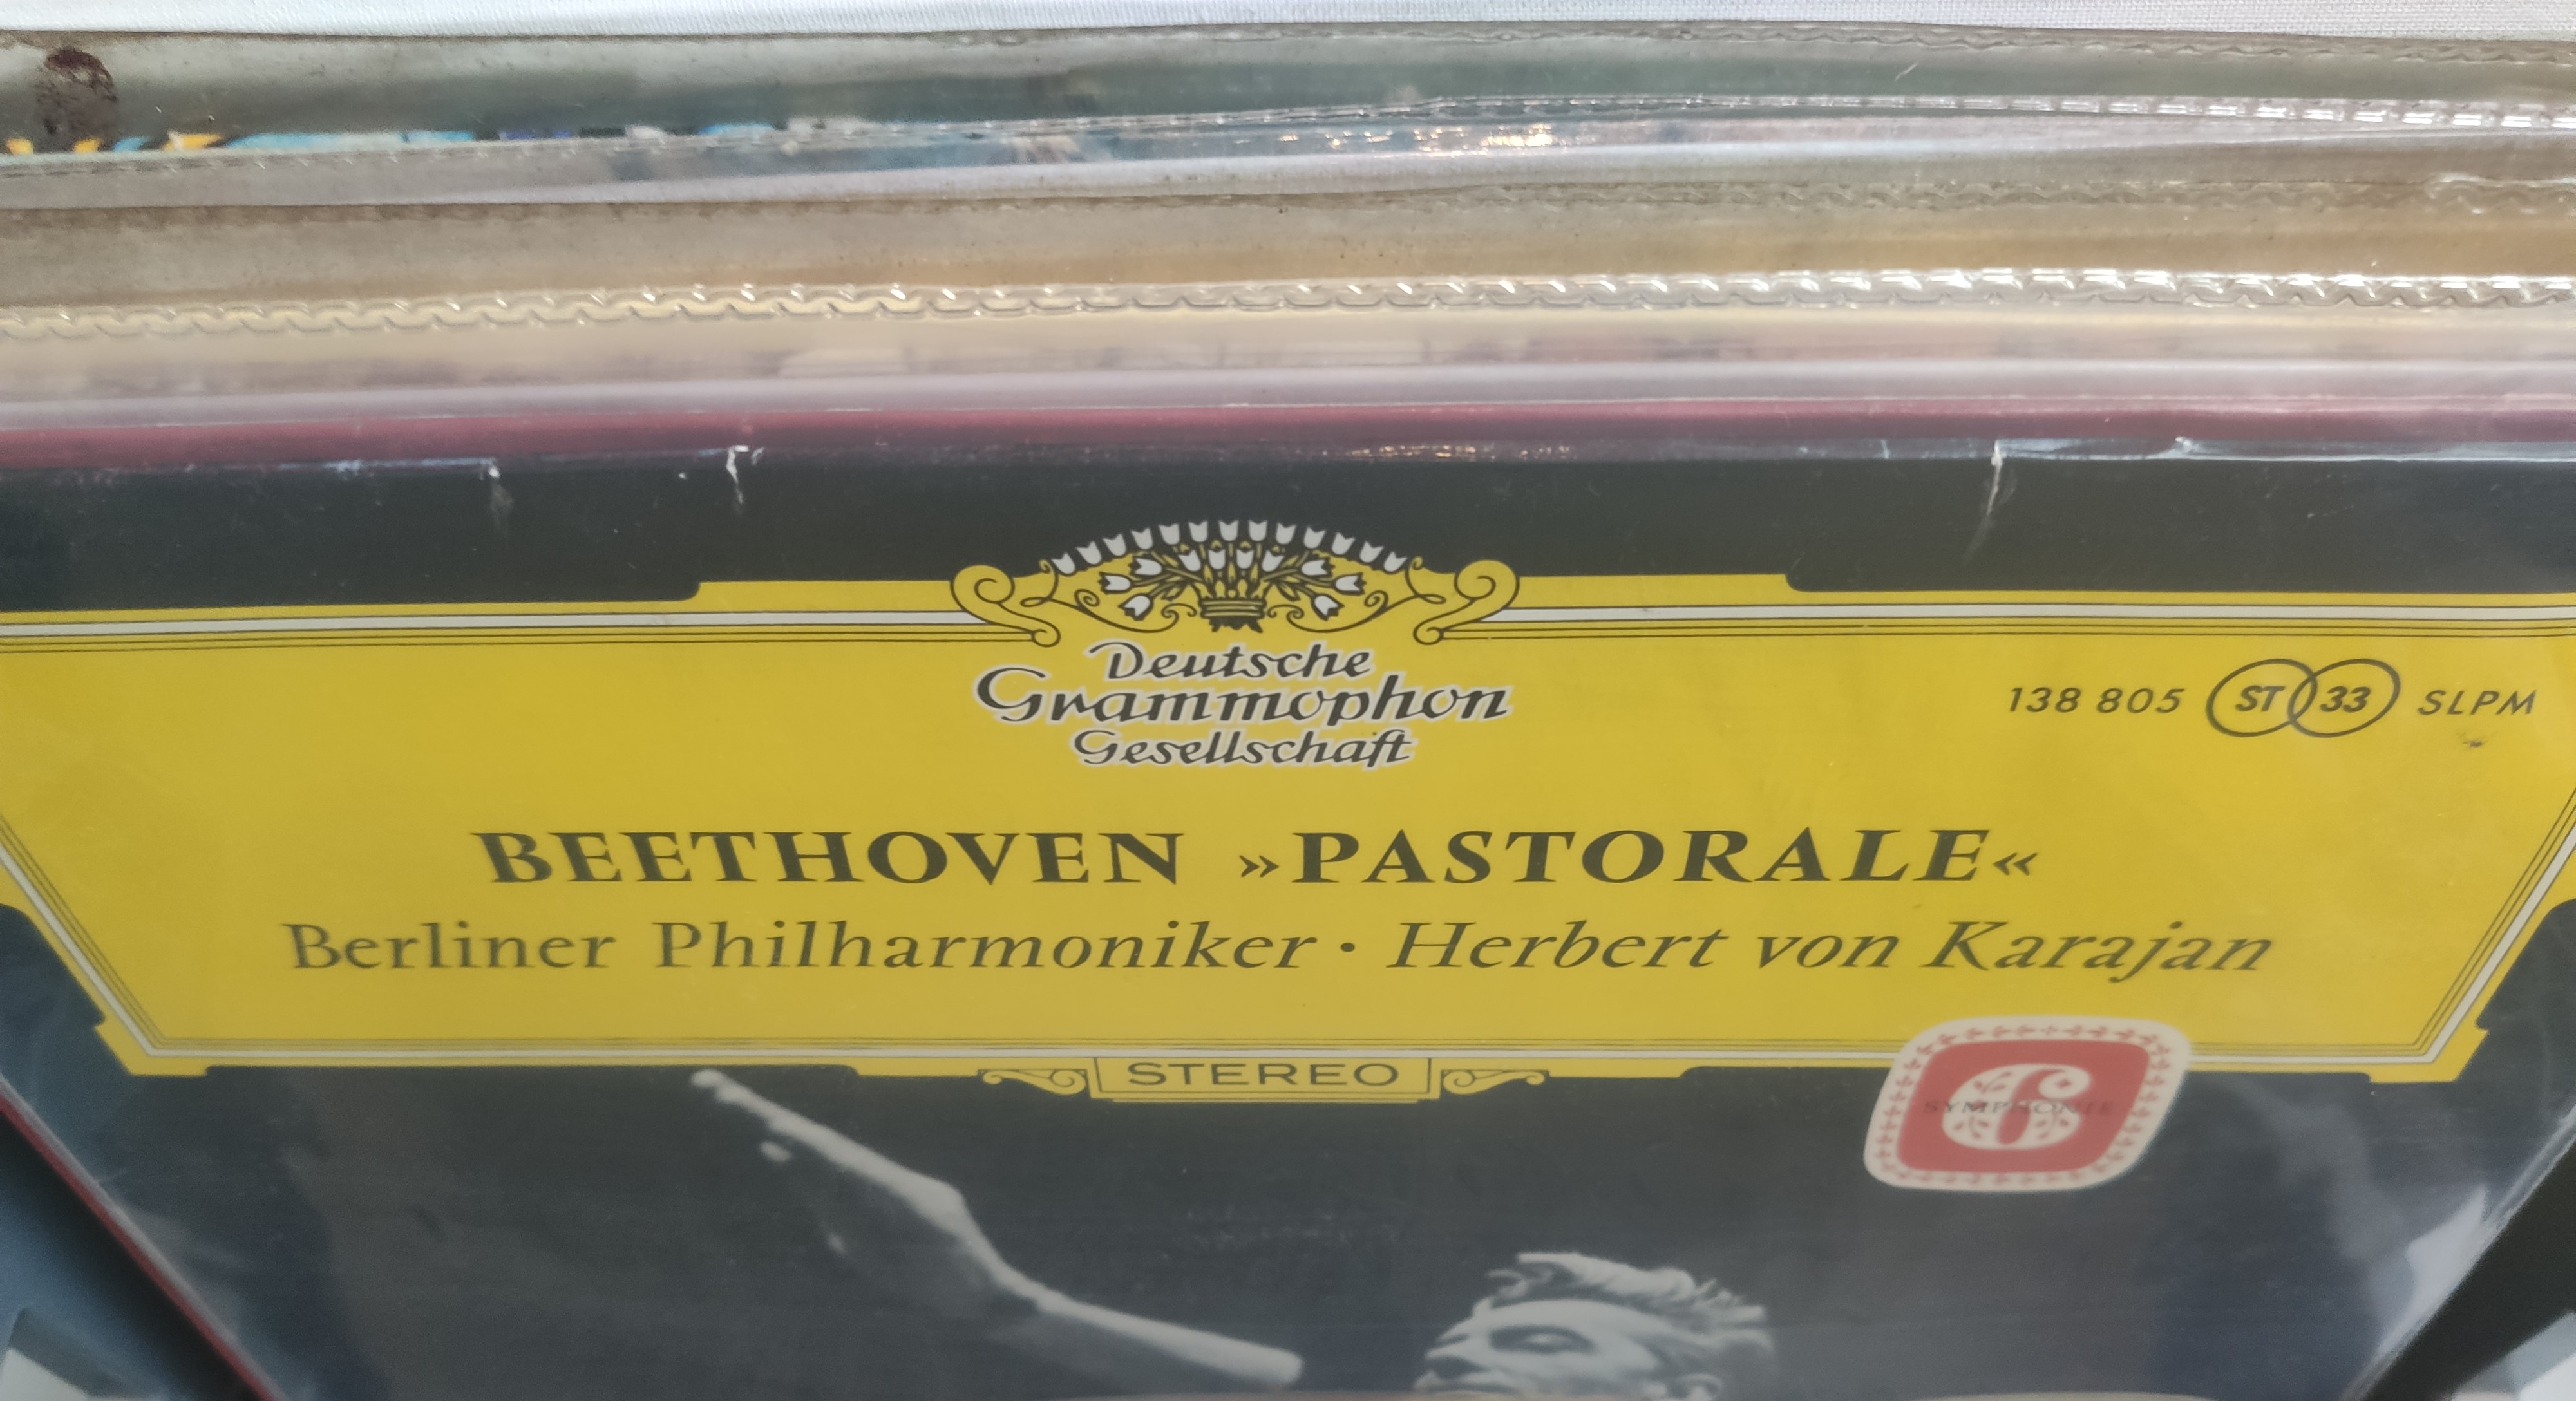 A Fantastic Collection of Deutsche Gramophone Classical Records. Digital and Stereo Etc. - Image 9 of 11